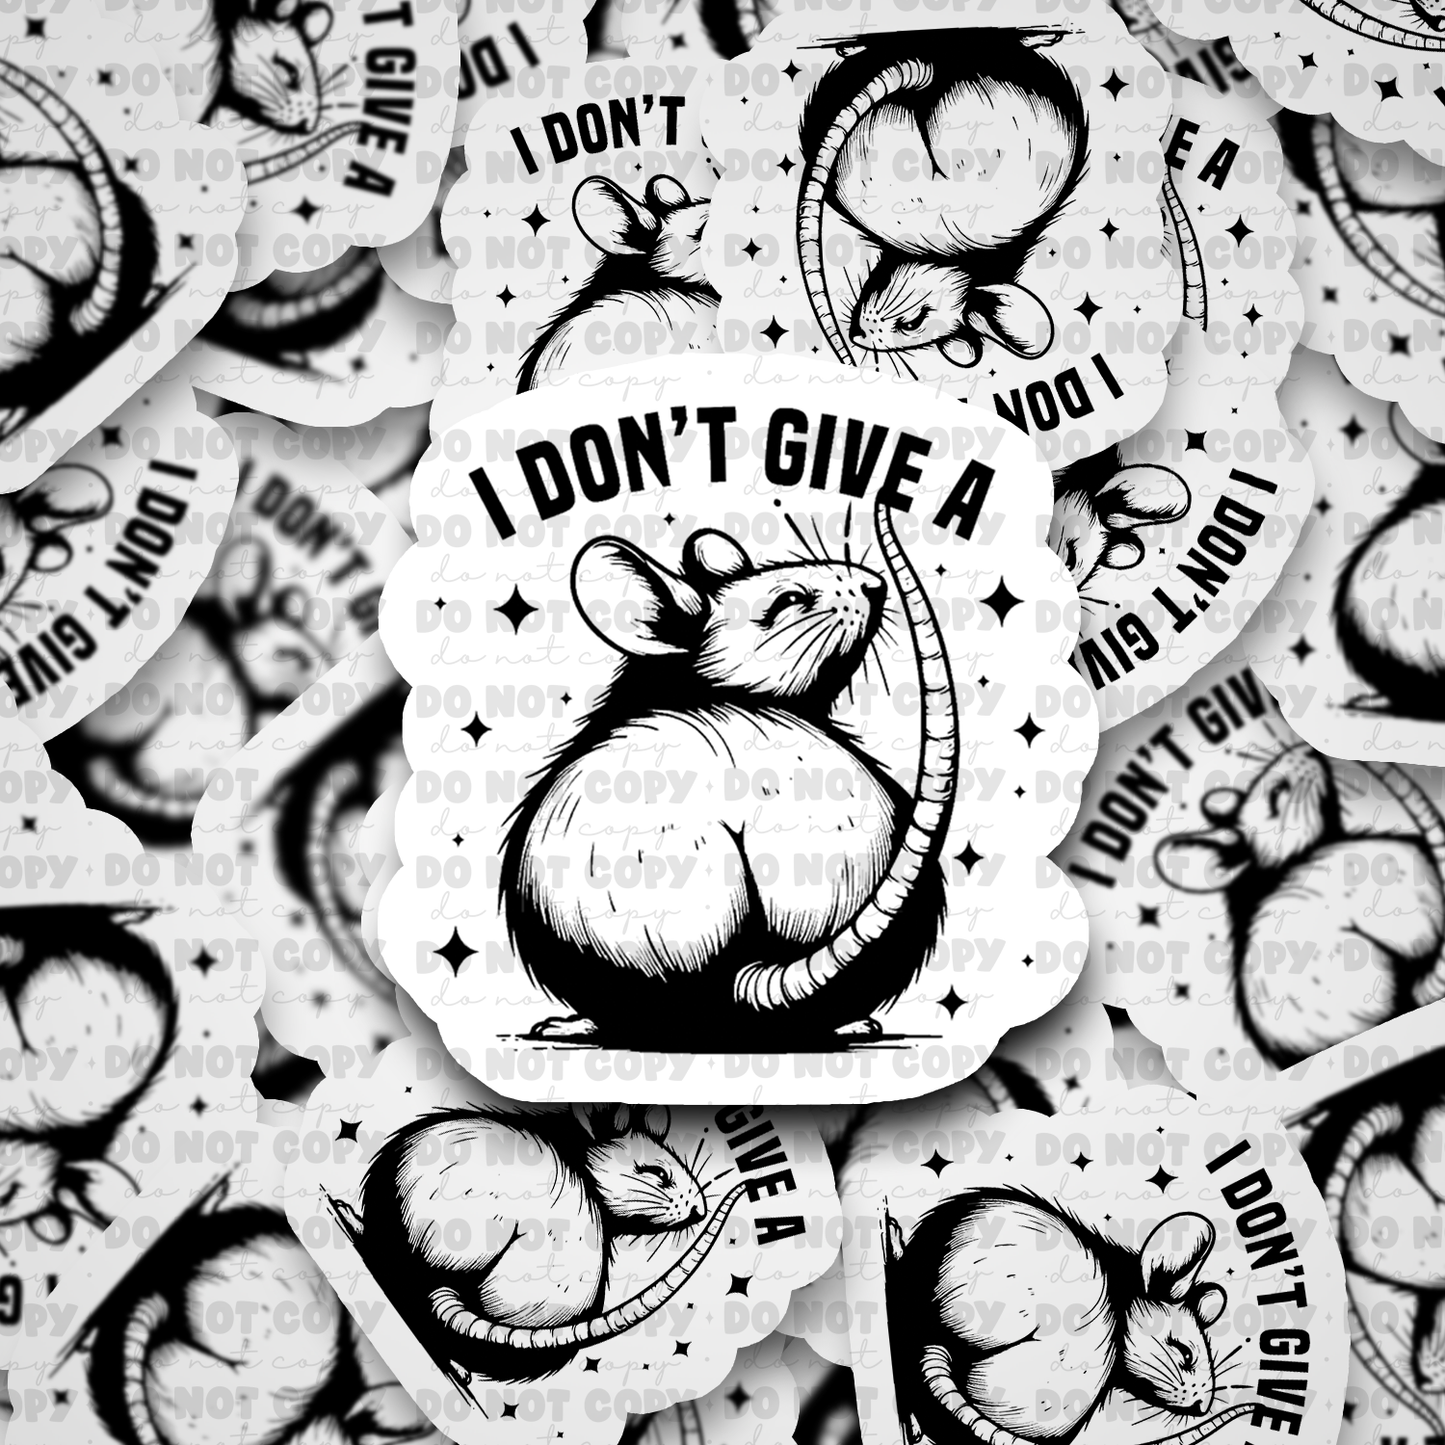 DC631 I don't give a rats Die cut sticker 3-5 Business Day TAT